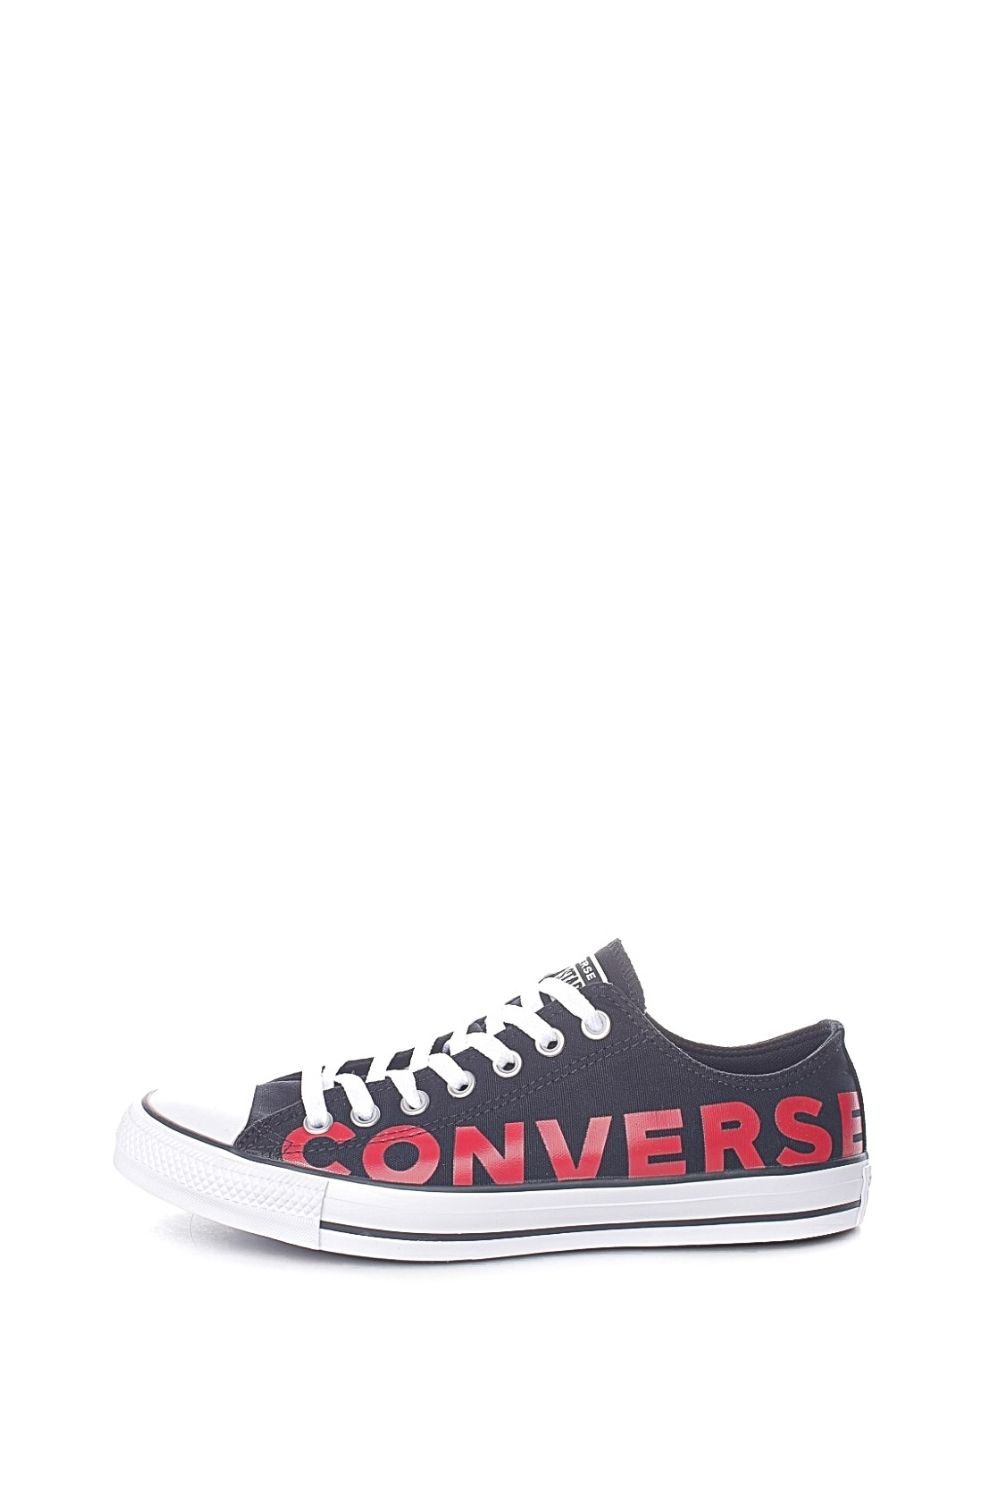 CONVERSE - Unisex sneakers CONVERSE Chuck Taylor All Star μαύρα Γυναικεία/Παπούτσια/Sneakers